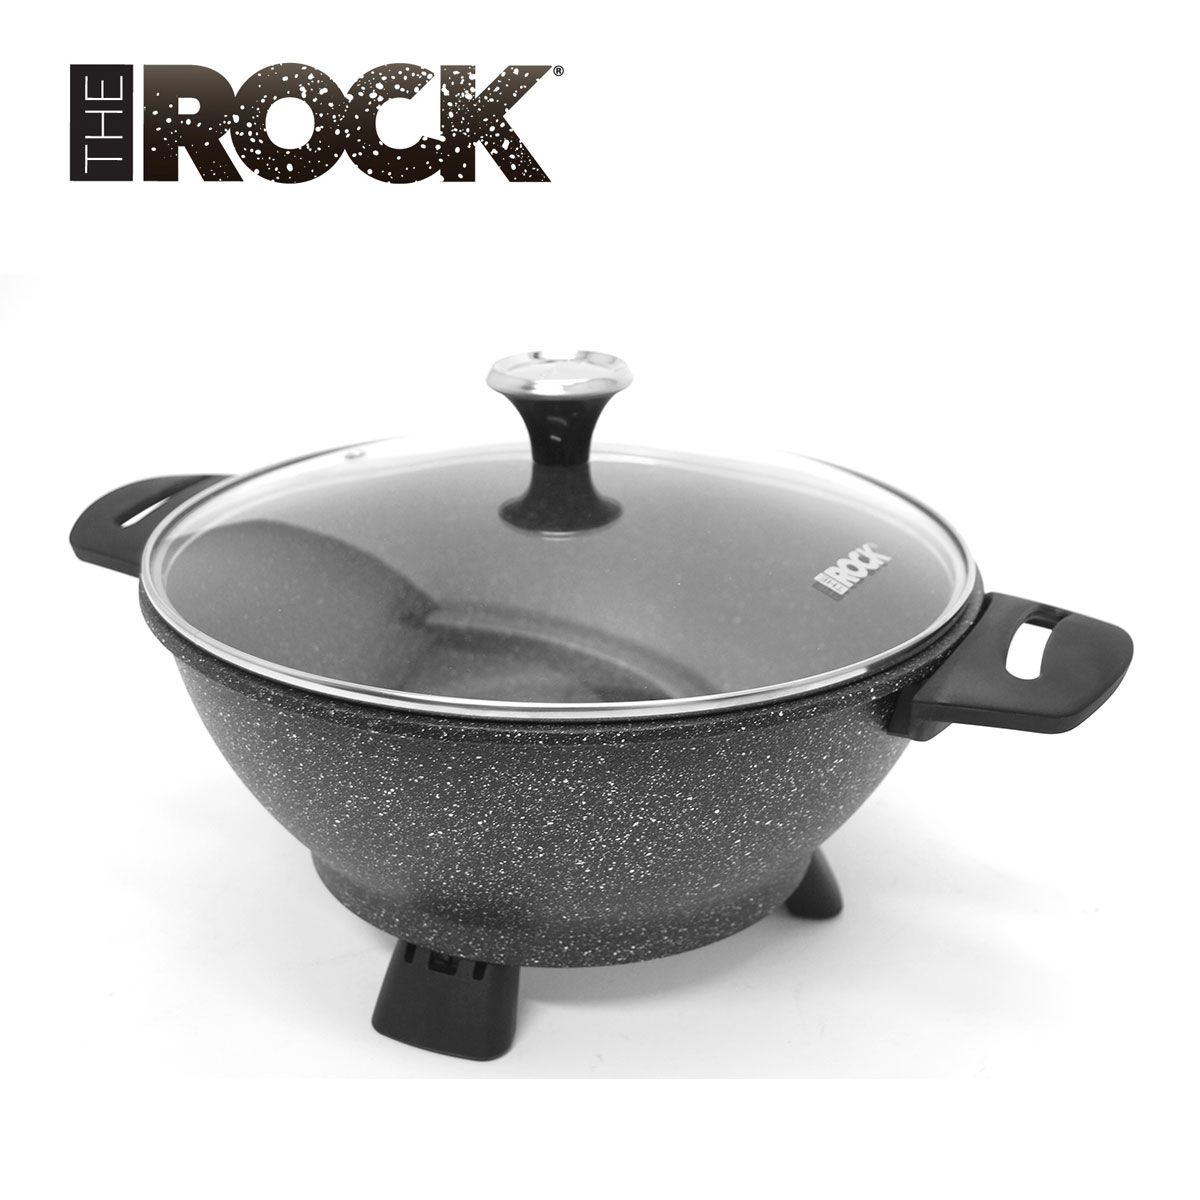 Starfrit - THE ROCK ELECTRIC CASSEROLE POT With its 3L